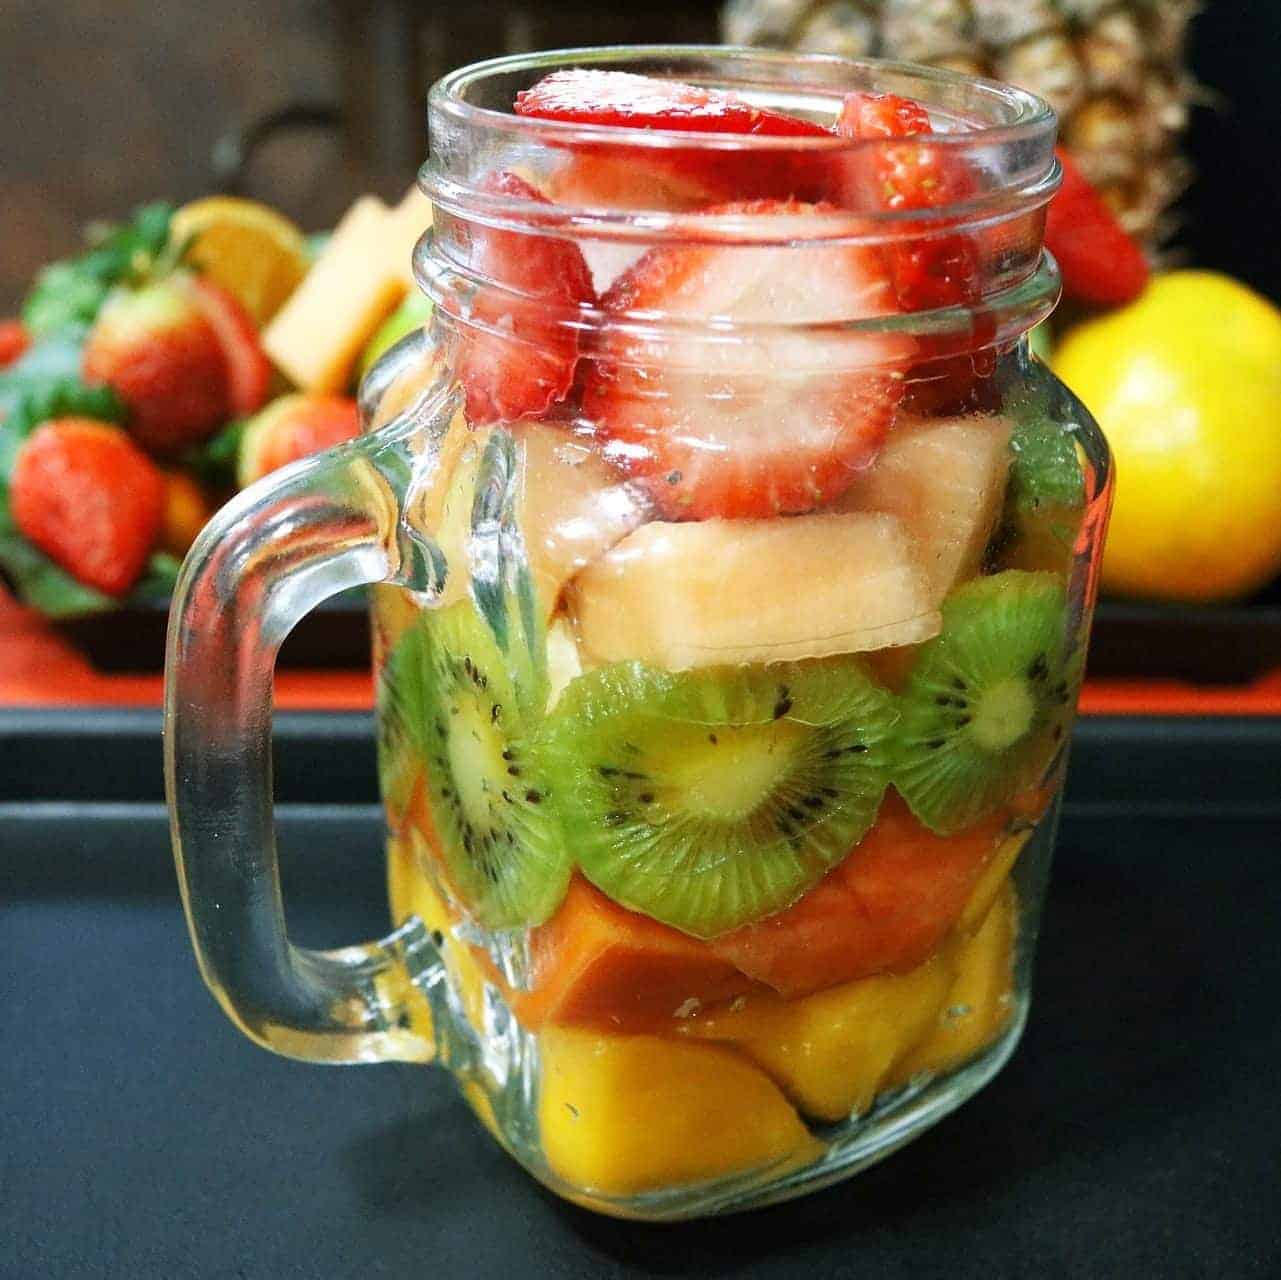 mixed fruits in a jar